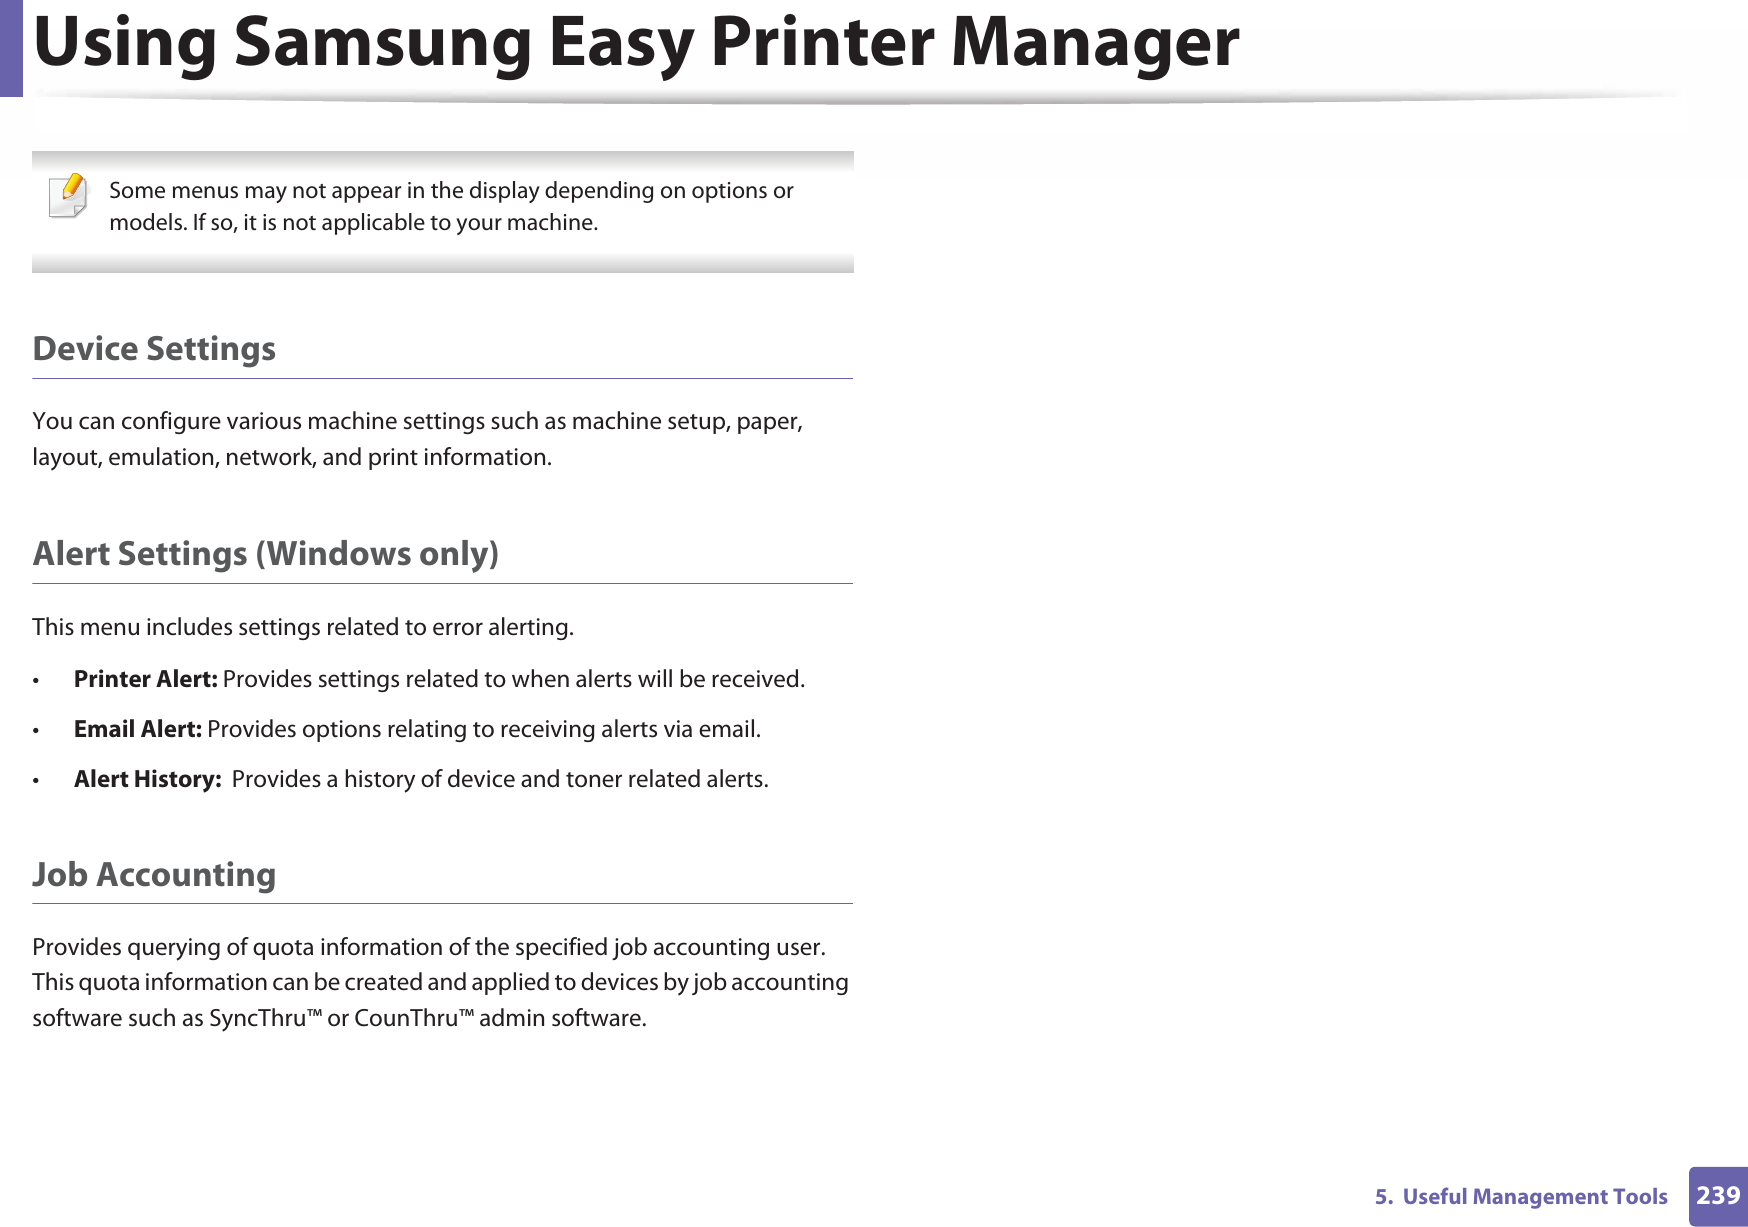 Using Samsung Easy Printer Manager2395.  Useful Management Tools Some menus may not appear in the display depending on options or models. If so, it is not applicable to your machine. Device SettingsYou can configure various machine settings such as machine setup, paper, layout, emulation, network, and print information.Alert Settings (Windows only)This menu includes settings related to error alerting. •Printer Alert: Provides settings related to when alerts will be received.•Email Alert: Provides options relating to receiving alerts via email.•Alert History:  Provides a history of device and toner related alerts.Job AccountingProvides querying of quota information of the specified job accounting user. This quota information can be created and applied to devices by job accounting software such as SyncThru™ or CounThru™ admin software.